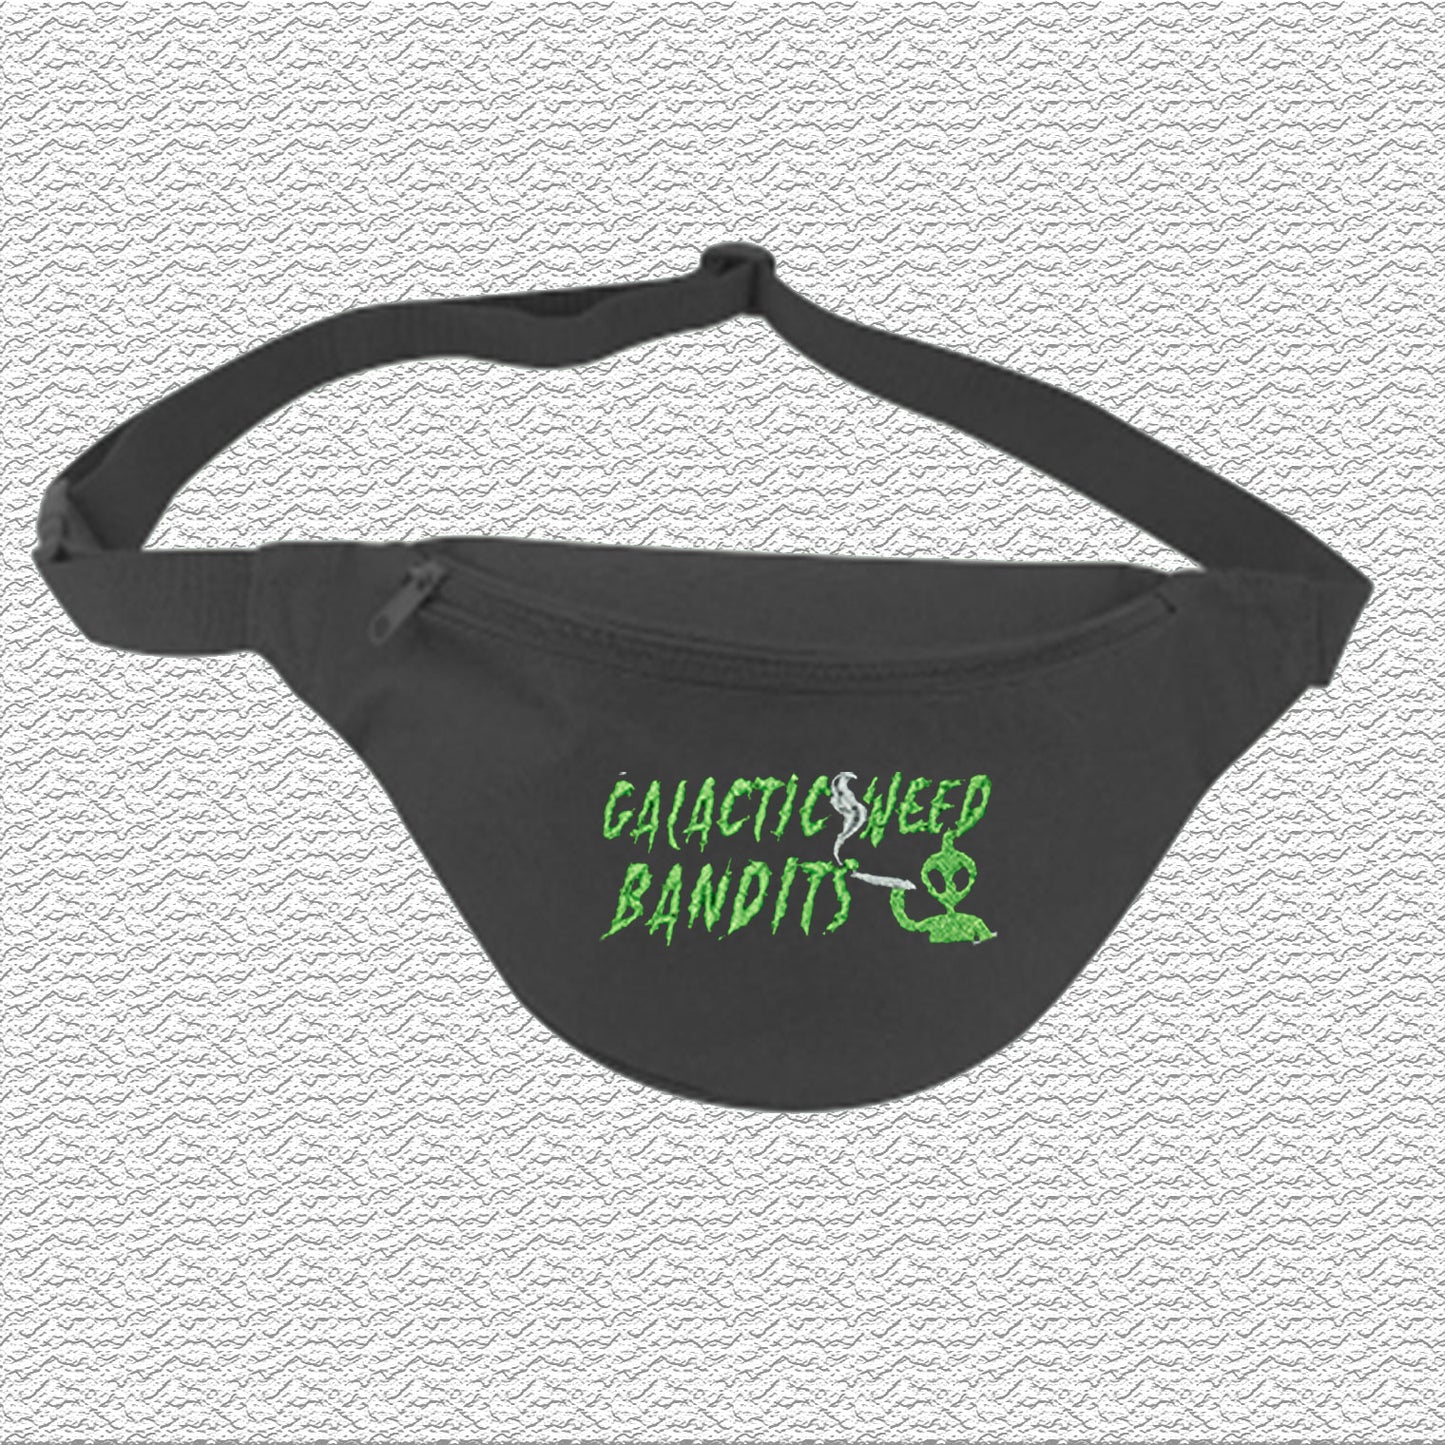 'Galactic Weed Bandits' Alien Puff'  - Fanny Pack